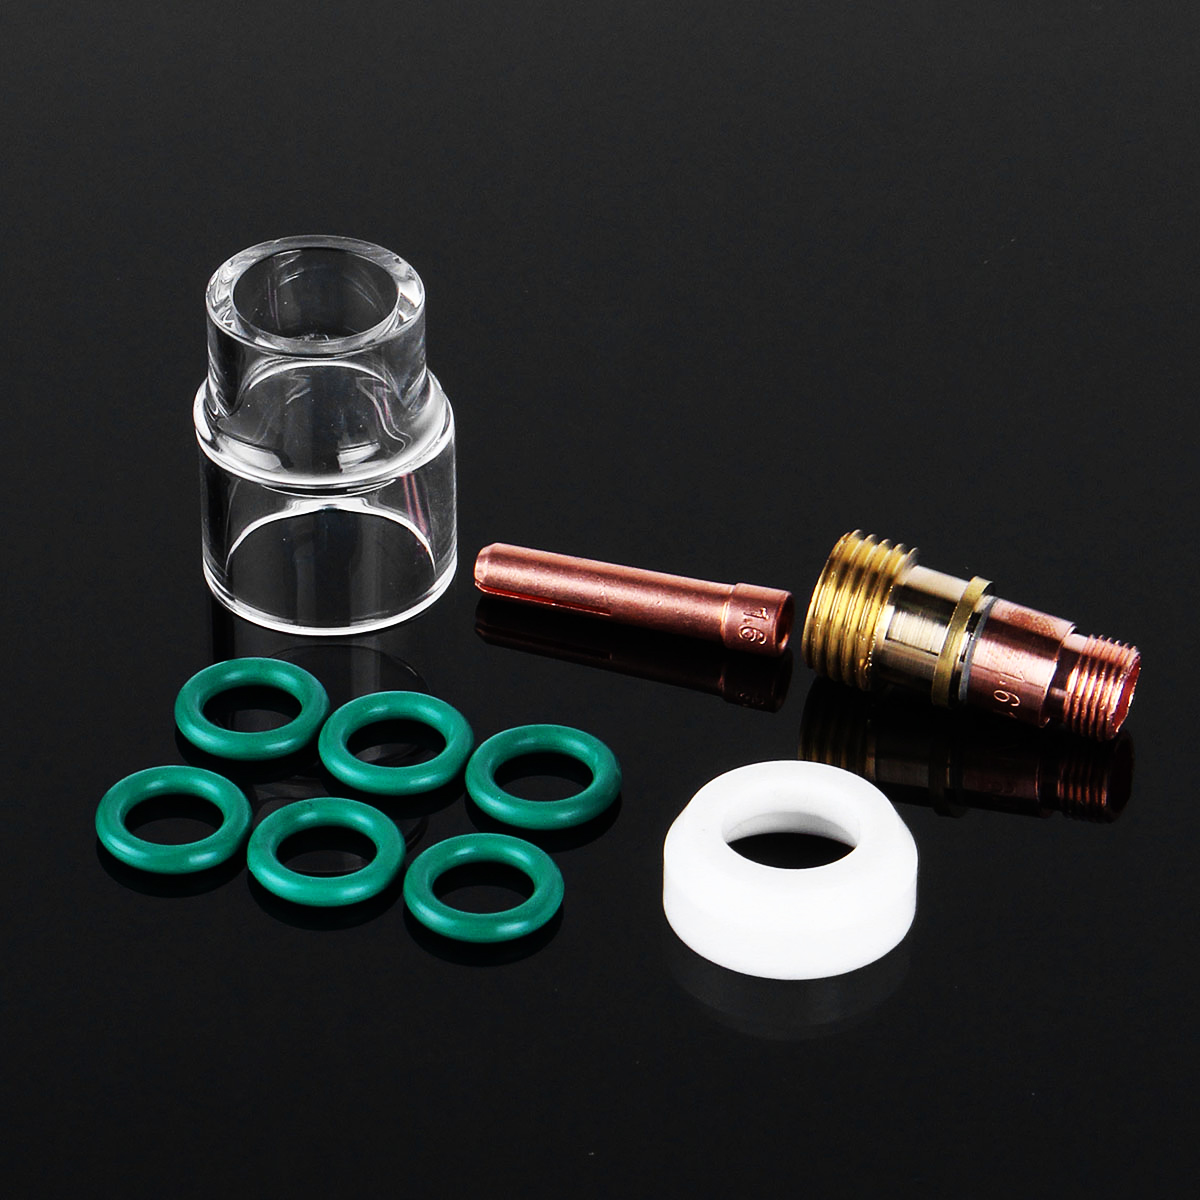 

10Pcs 1.6mm 1/16inch TIG Welding Torch Stubby Gas Lens #12 Pyrex Cup Kit for WP-17/18